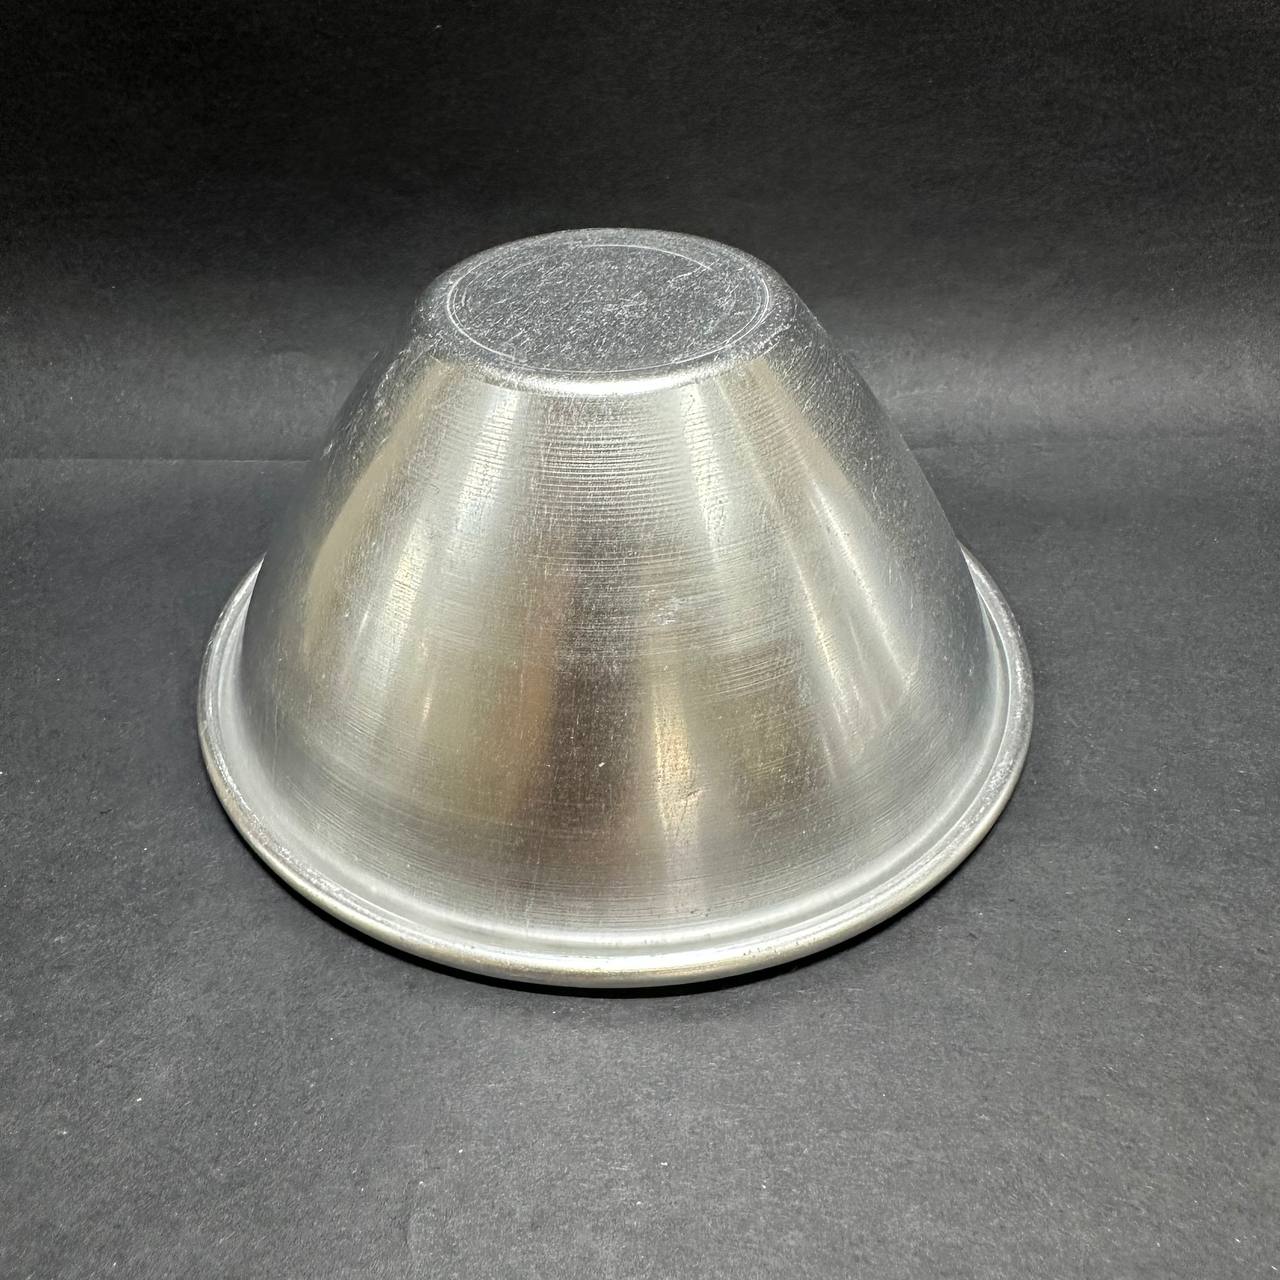 Buy Cake Mould - Doll Skirt / Dome Shape online in India at best price